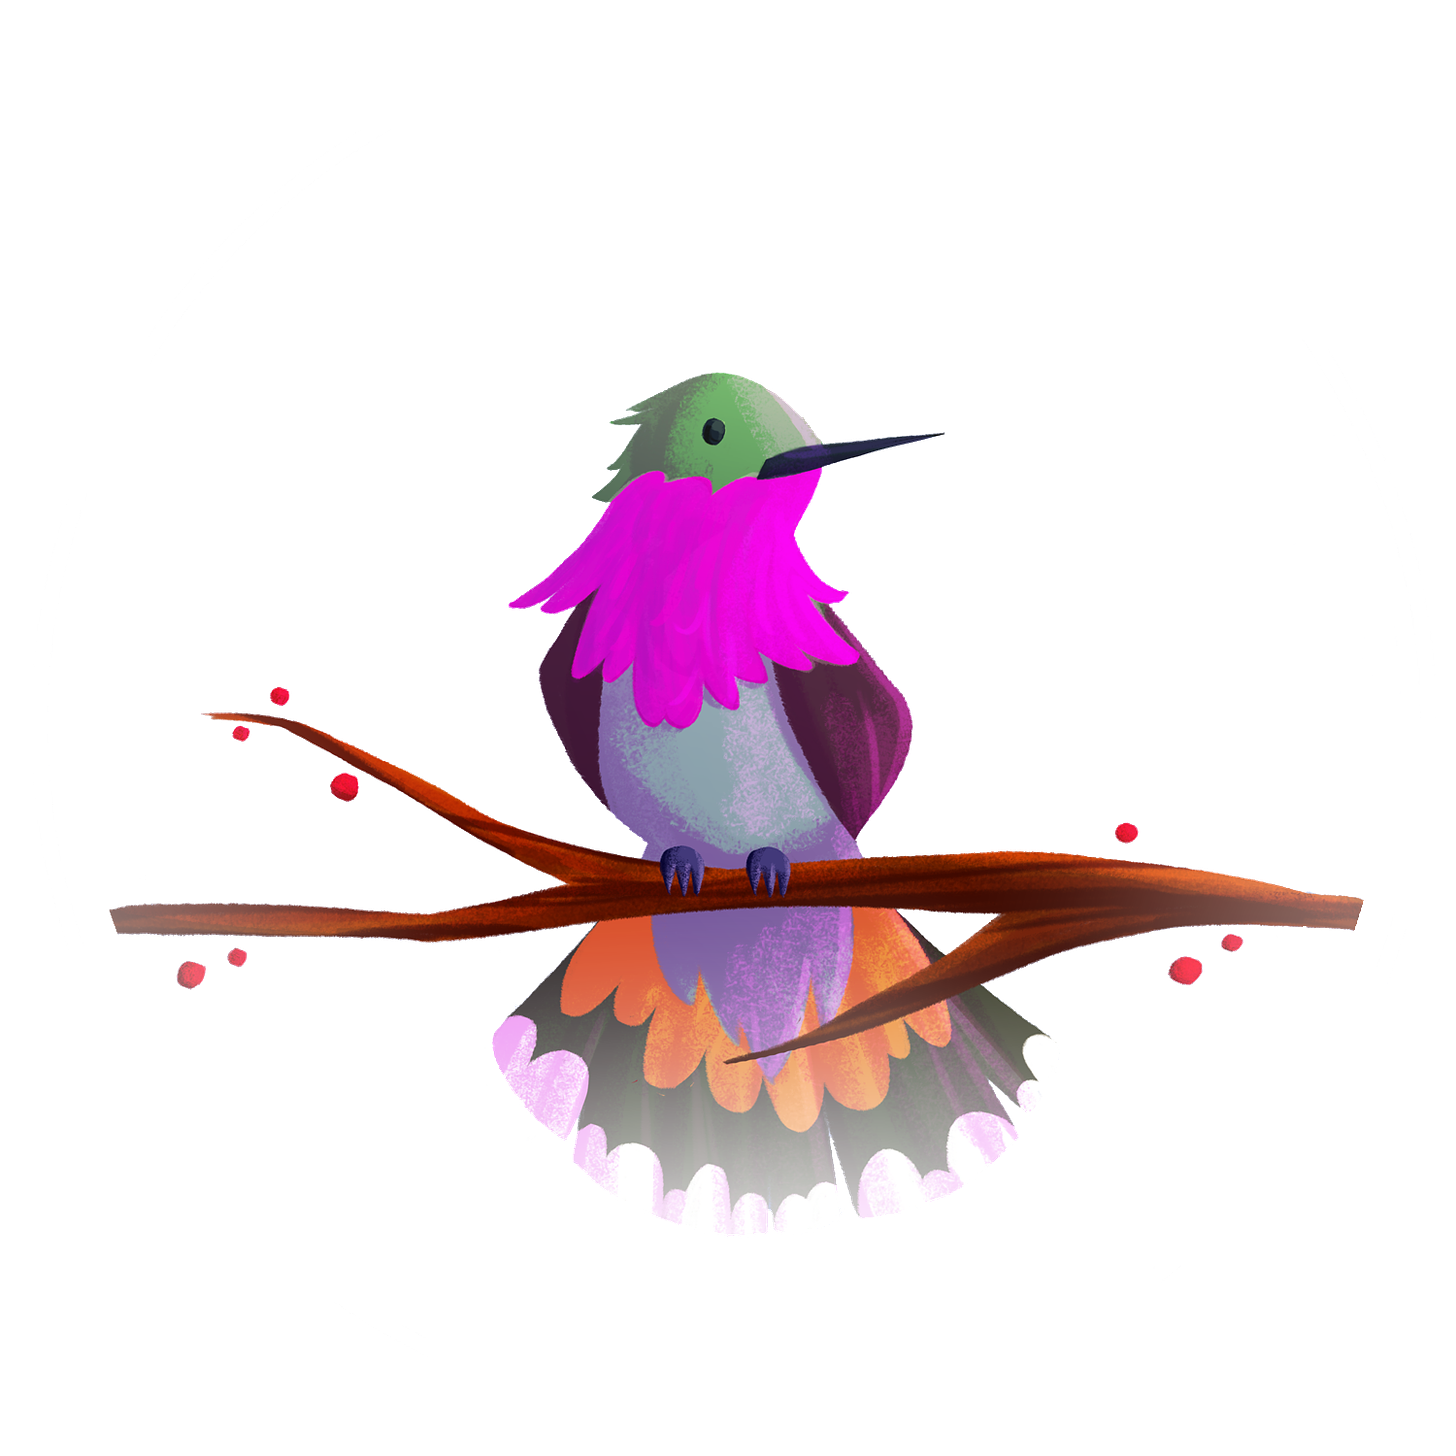 A colorful hummingbird with a pink throat on a branch with berries.